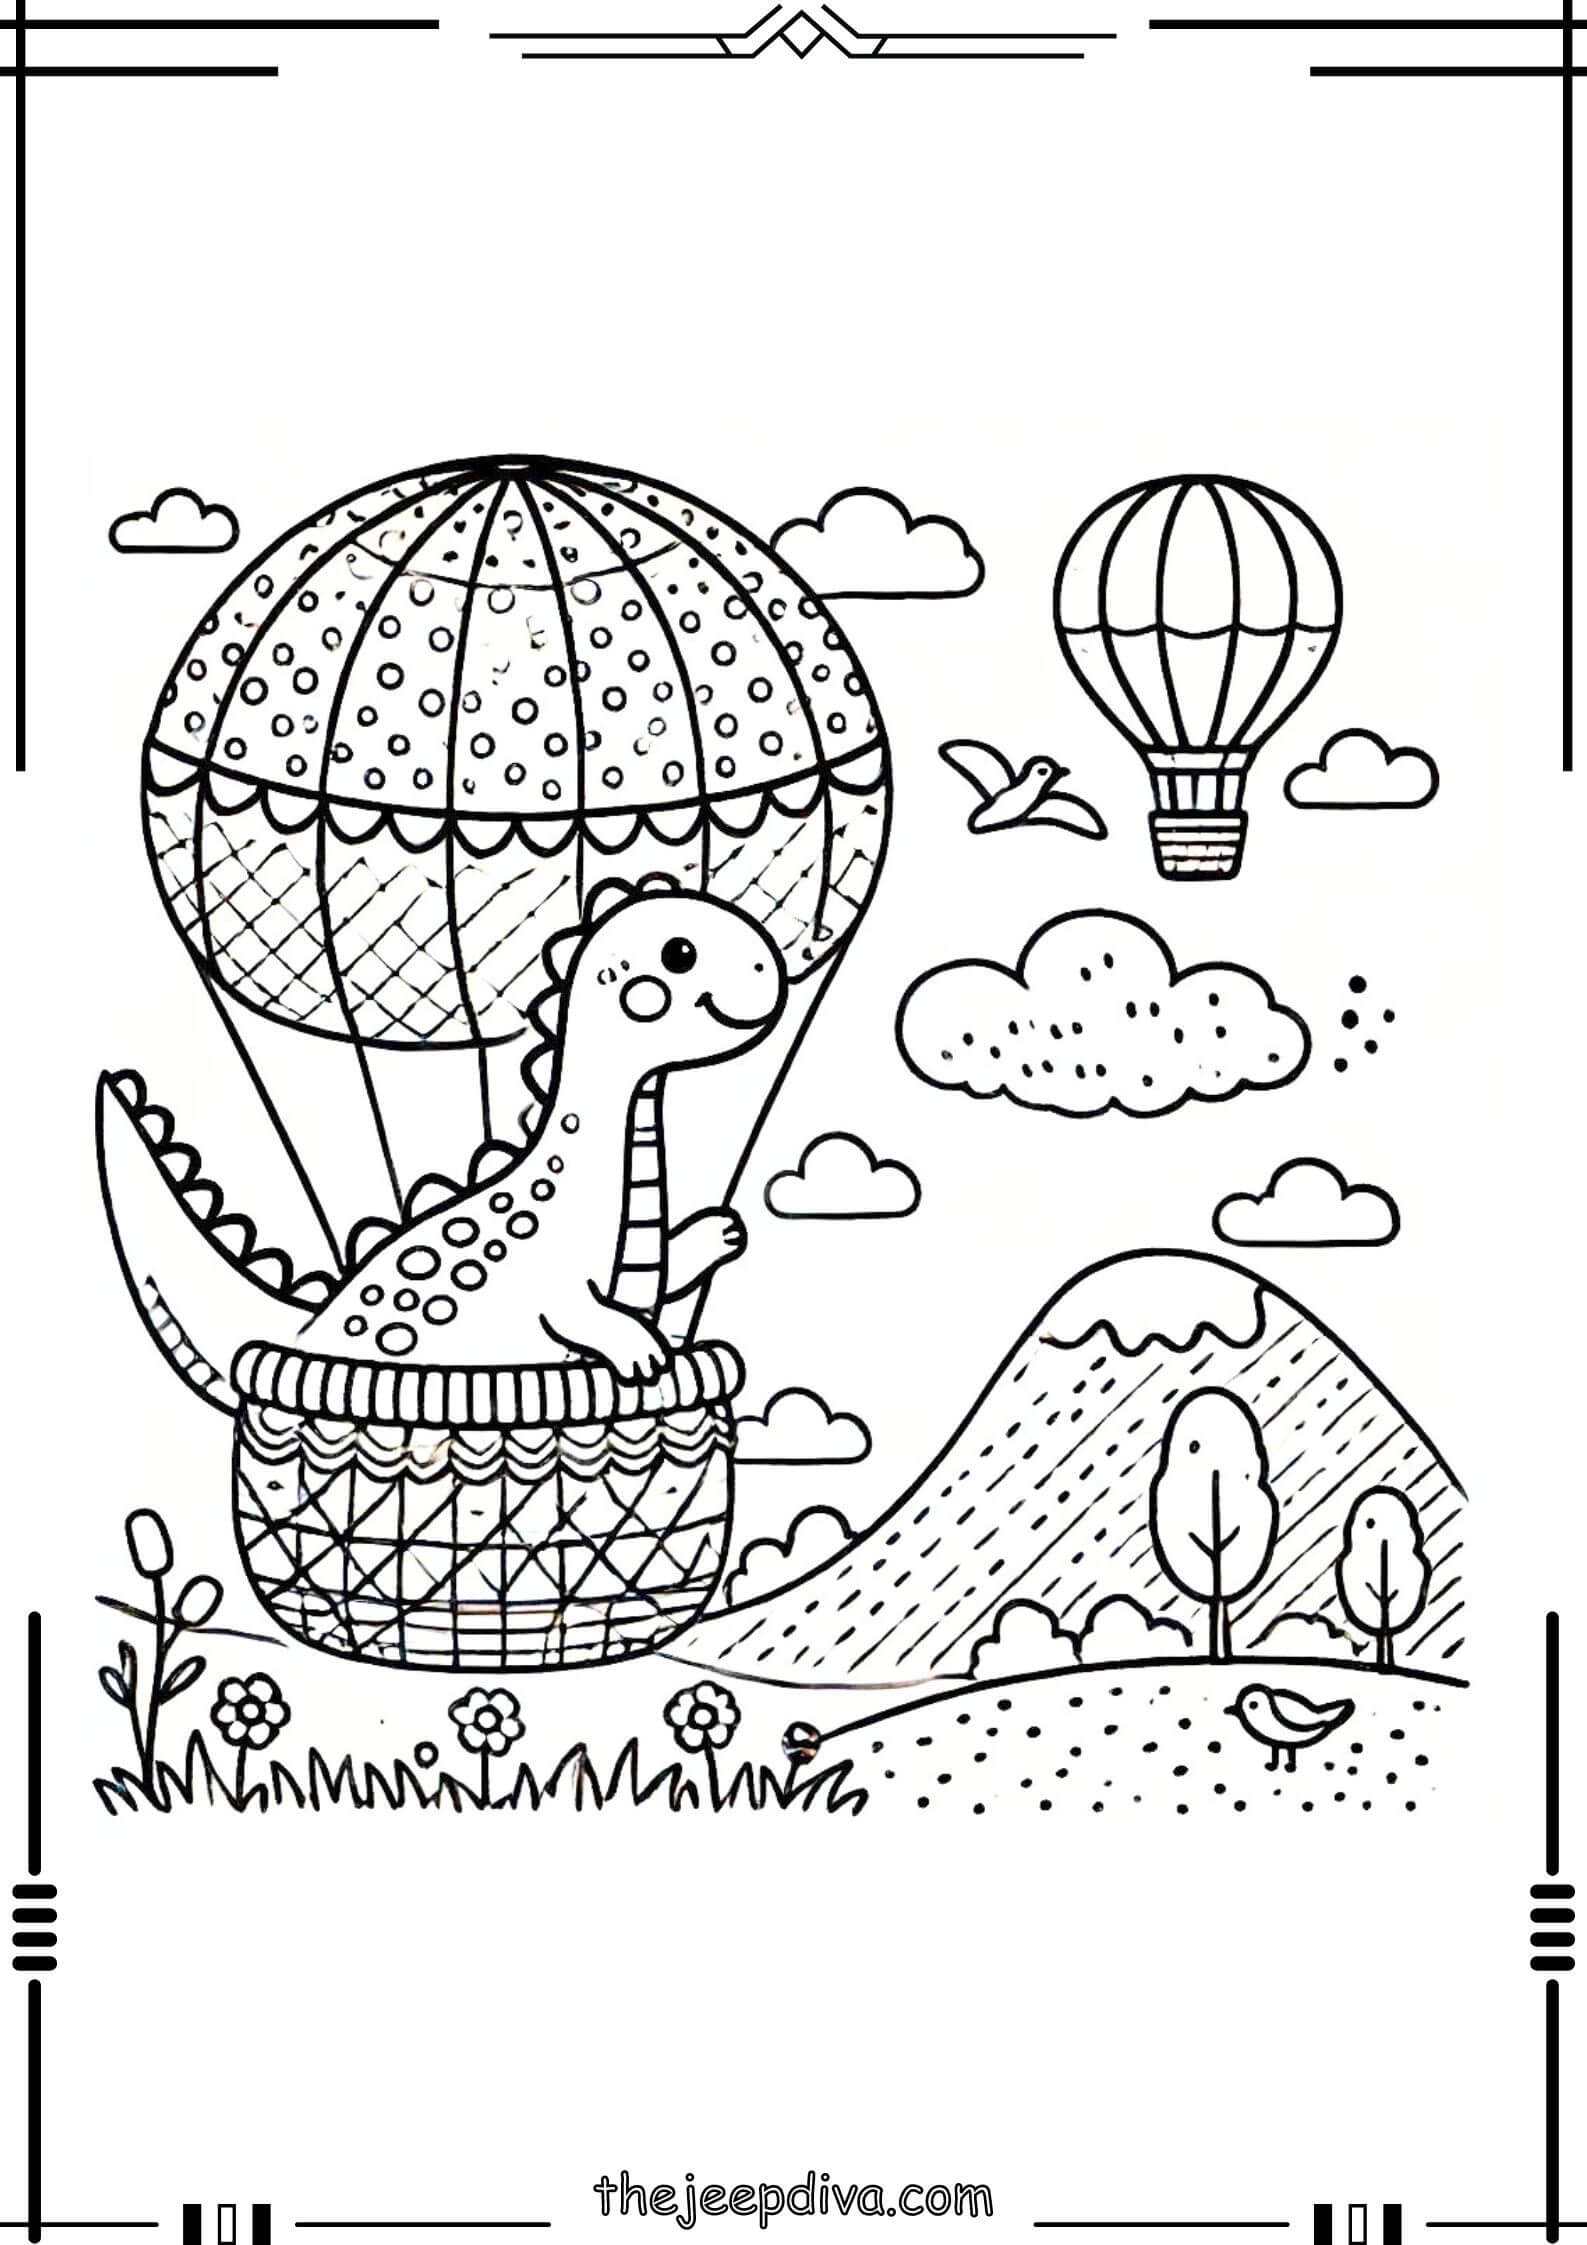 Dinosaur-Colouring-Pages-Hard-13